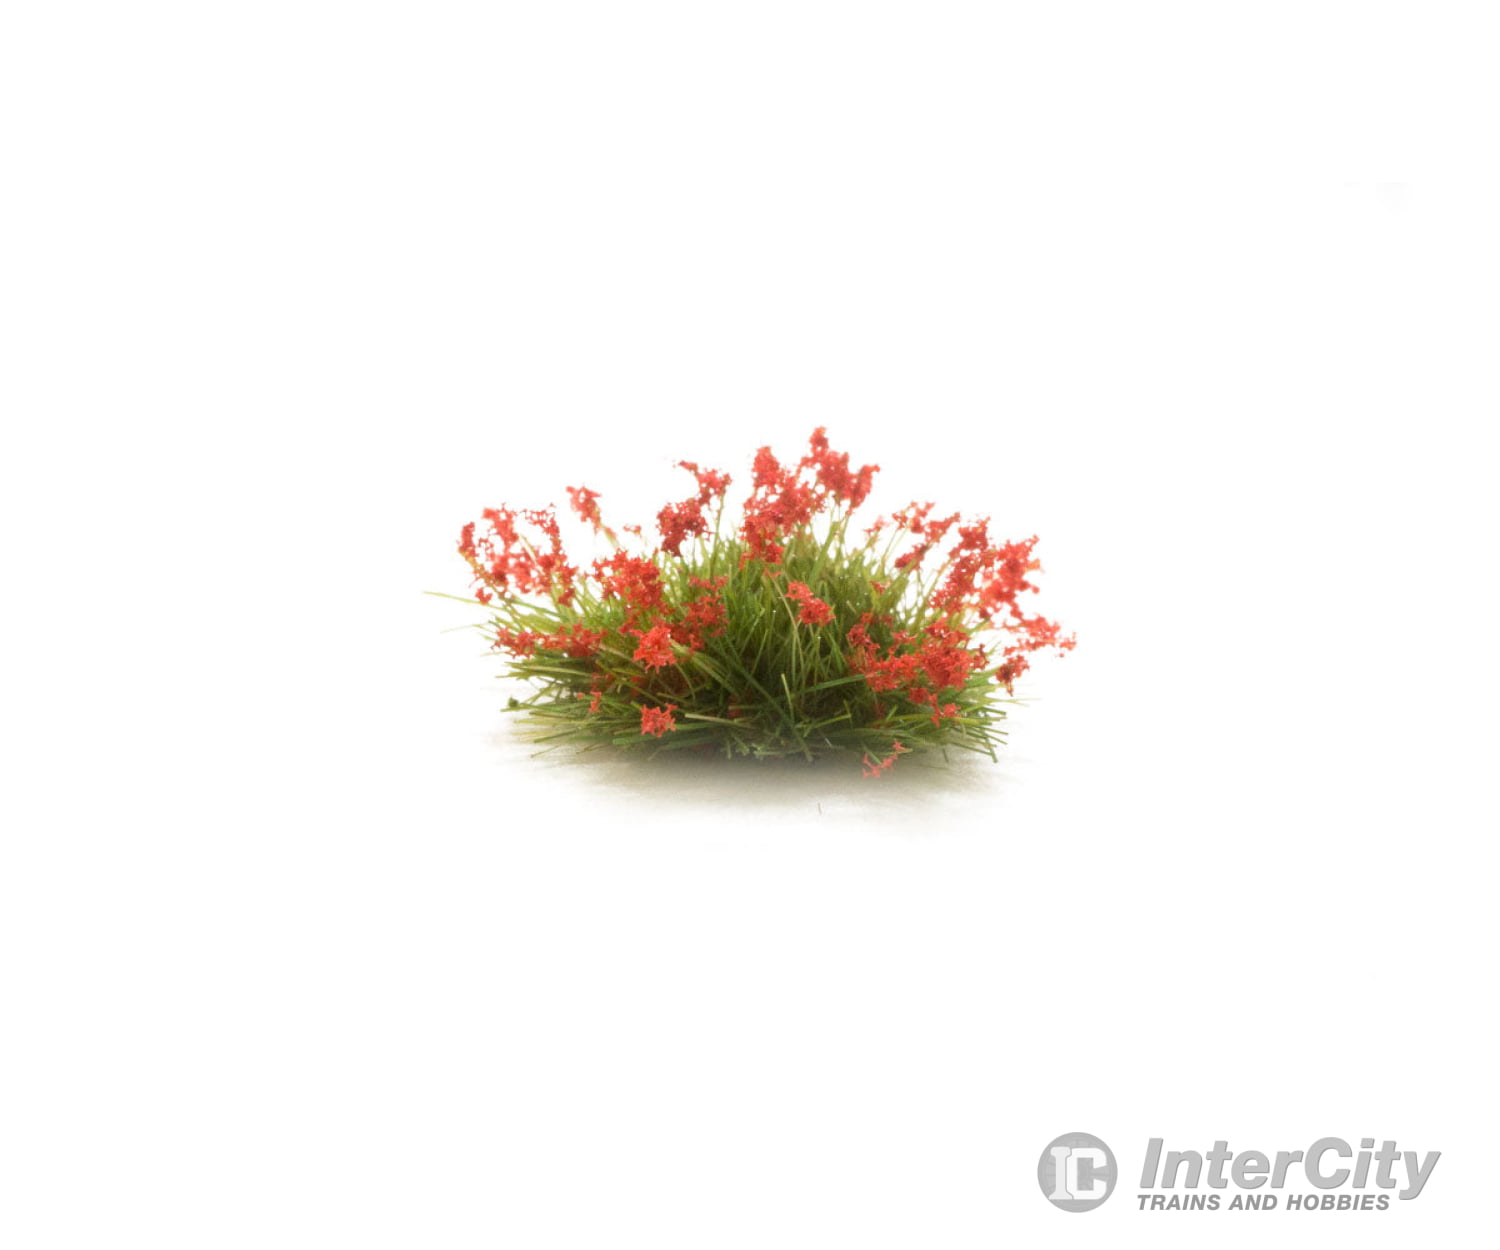 Woodland Scenics 773 Red Flowering Tufts Grass & Scenery Mats